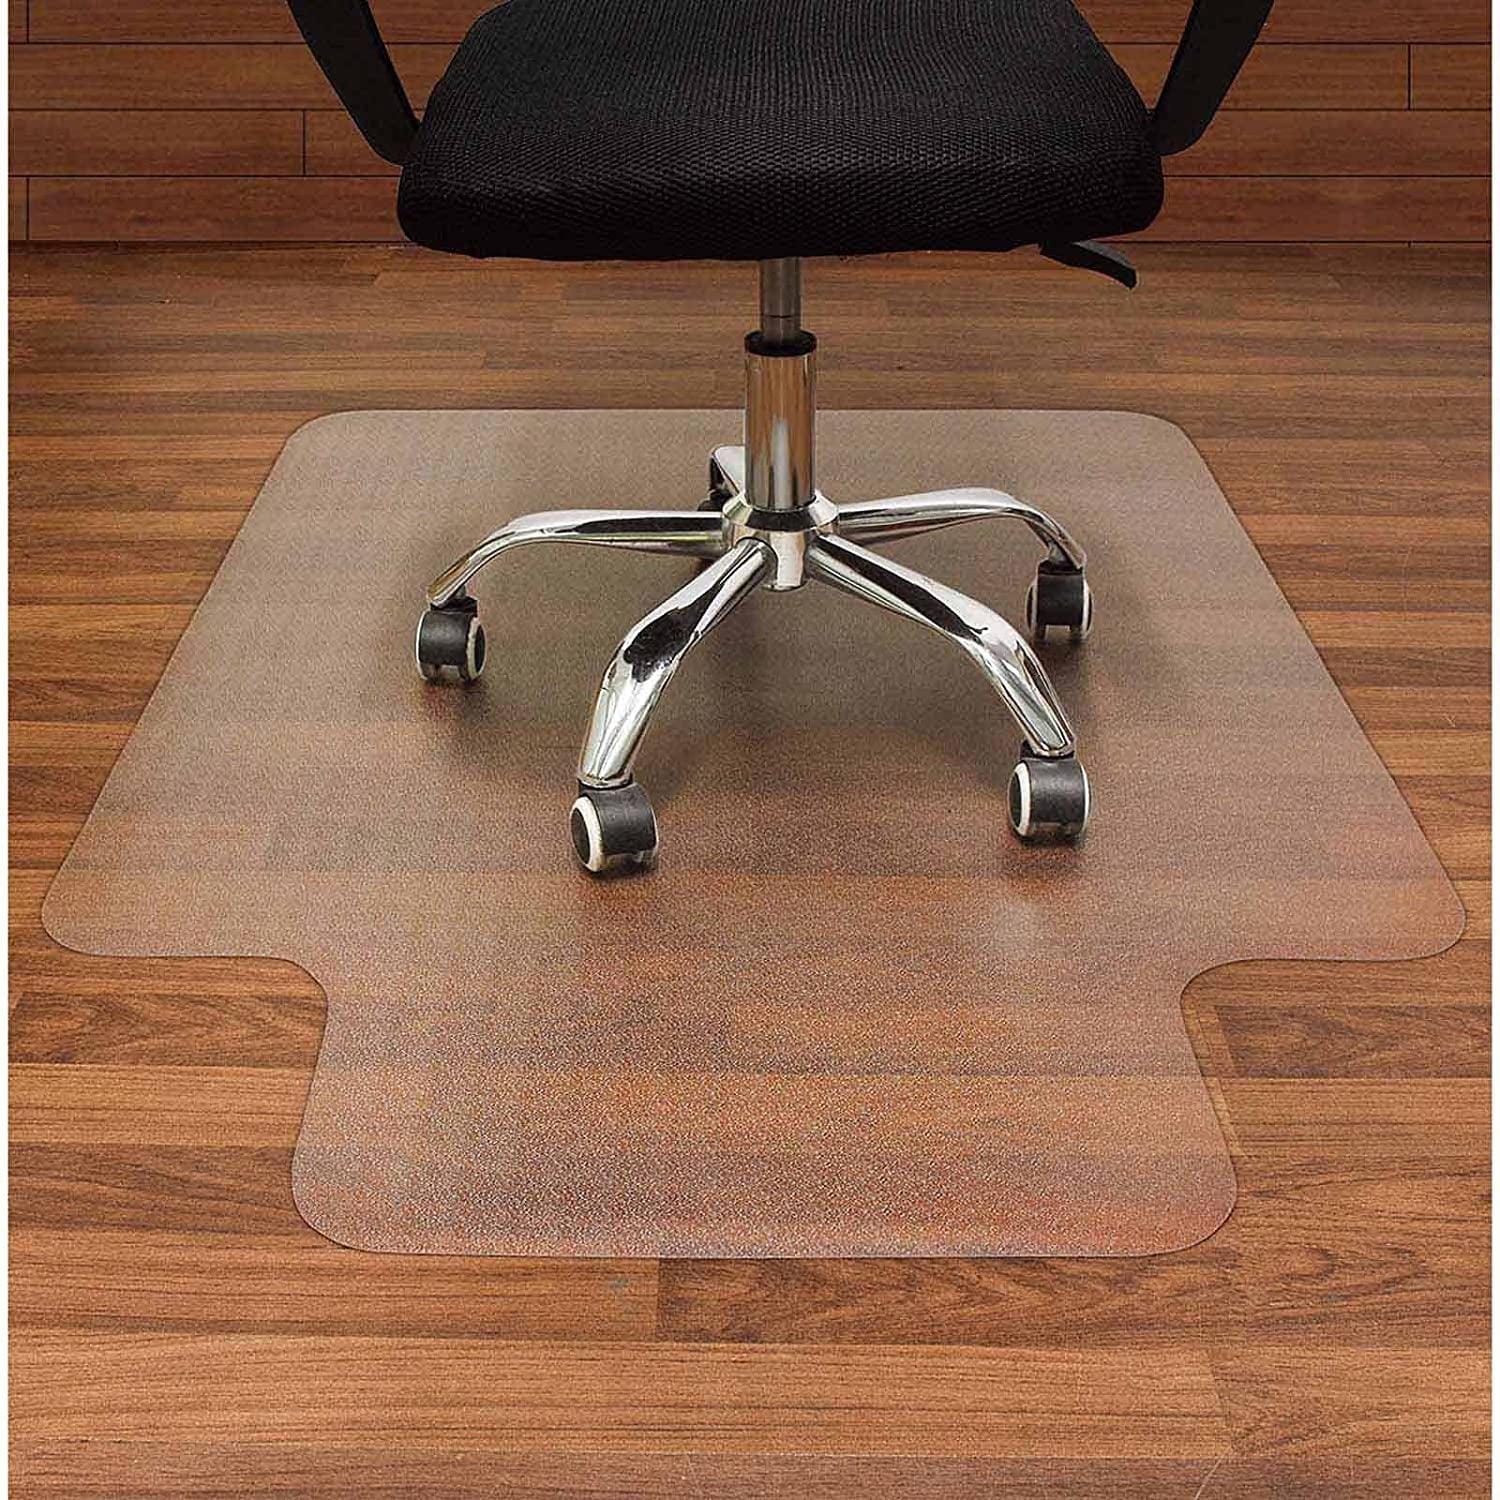 48''x30'' PVC Mat Home Office Carpet Hard Protector Desk Floor Chair with Lip US 